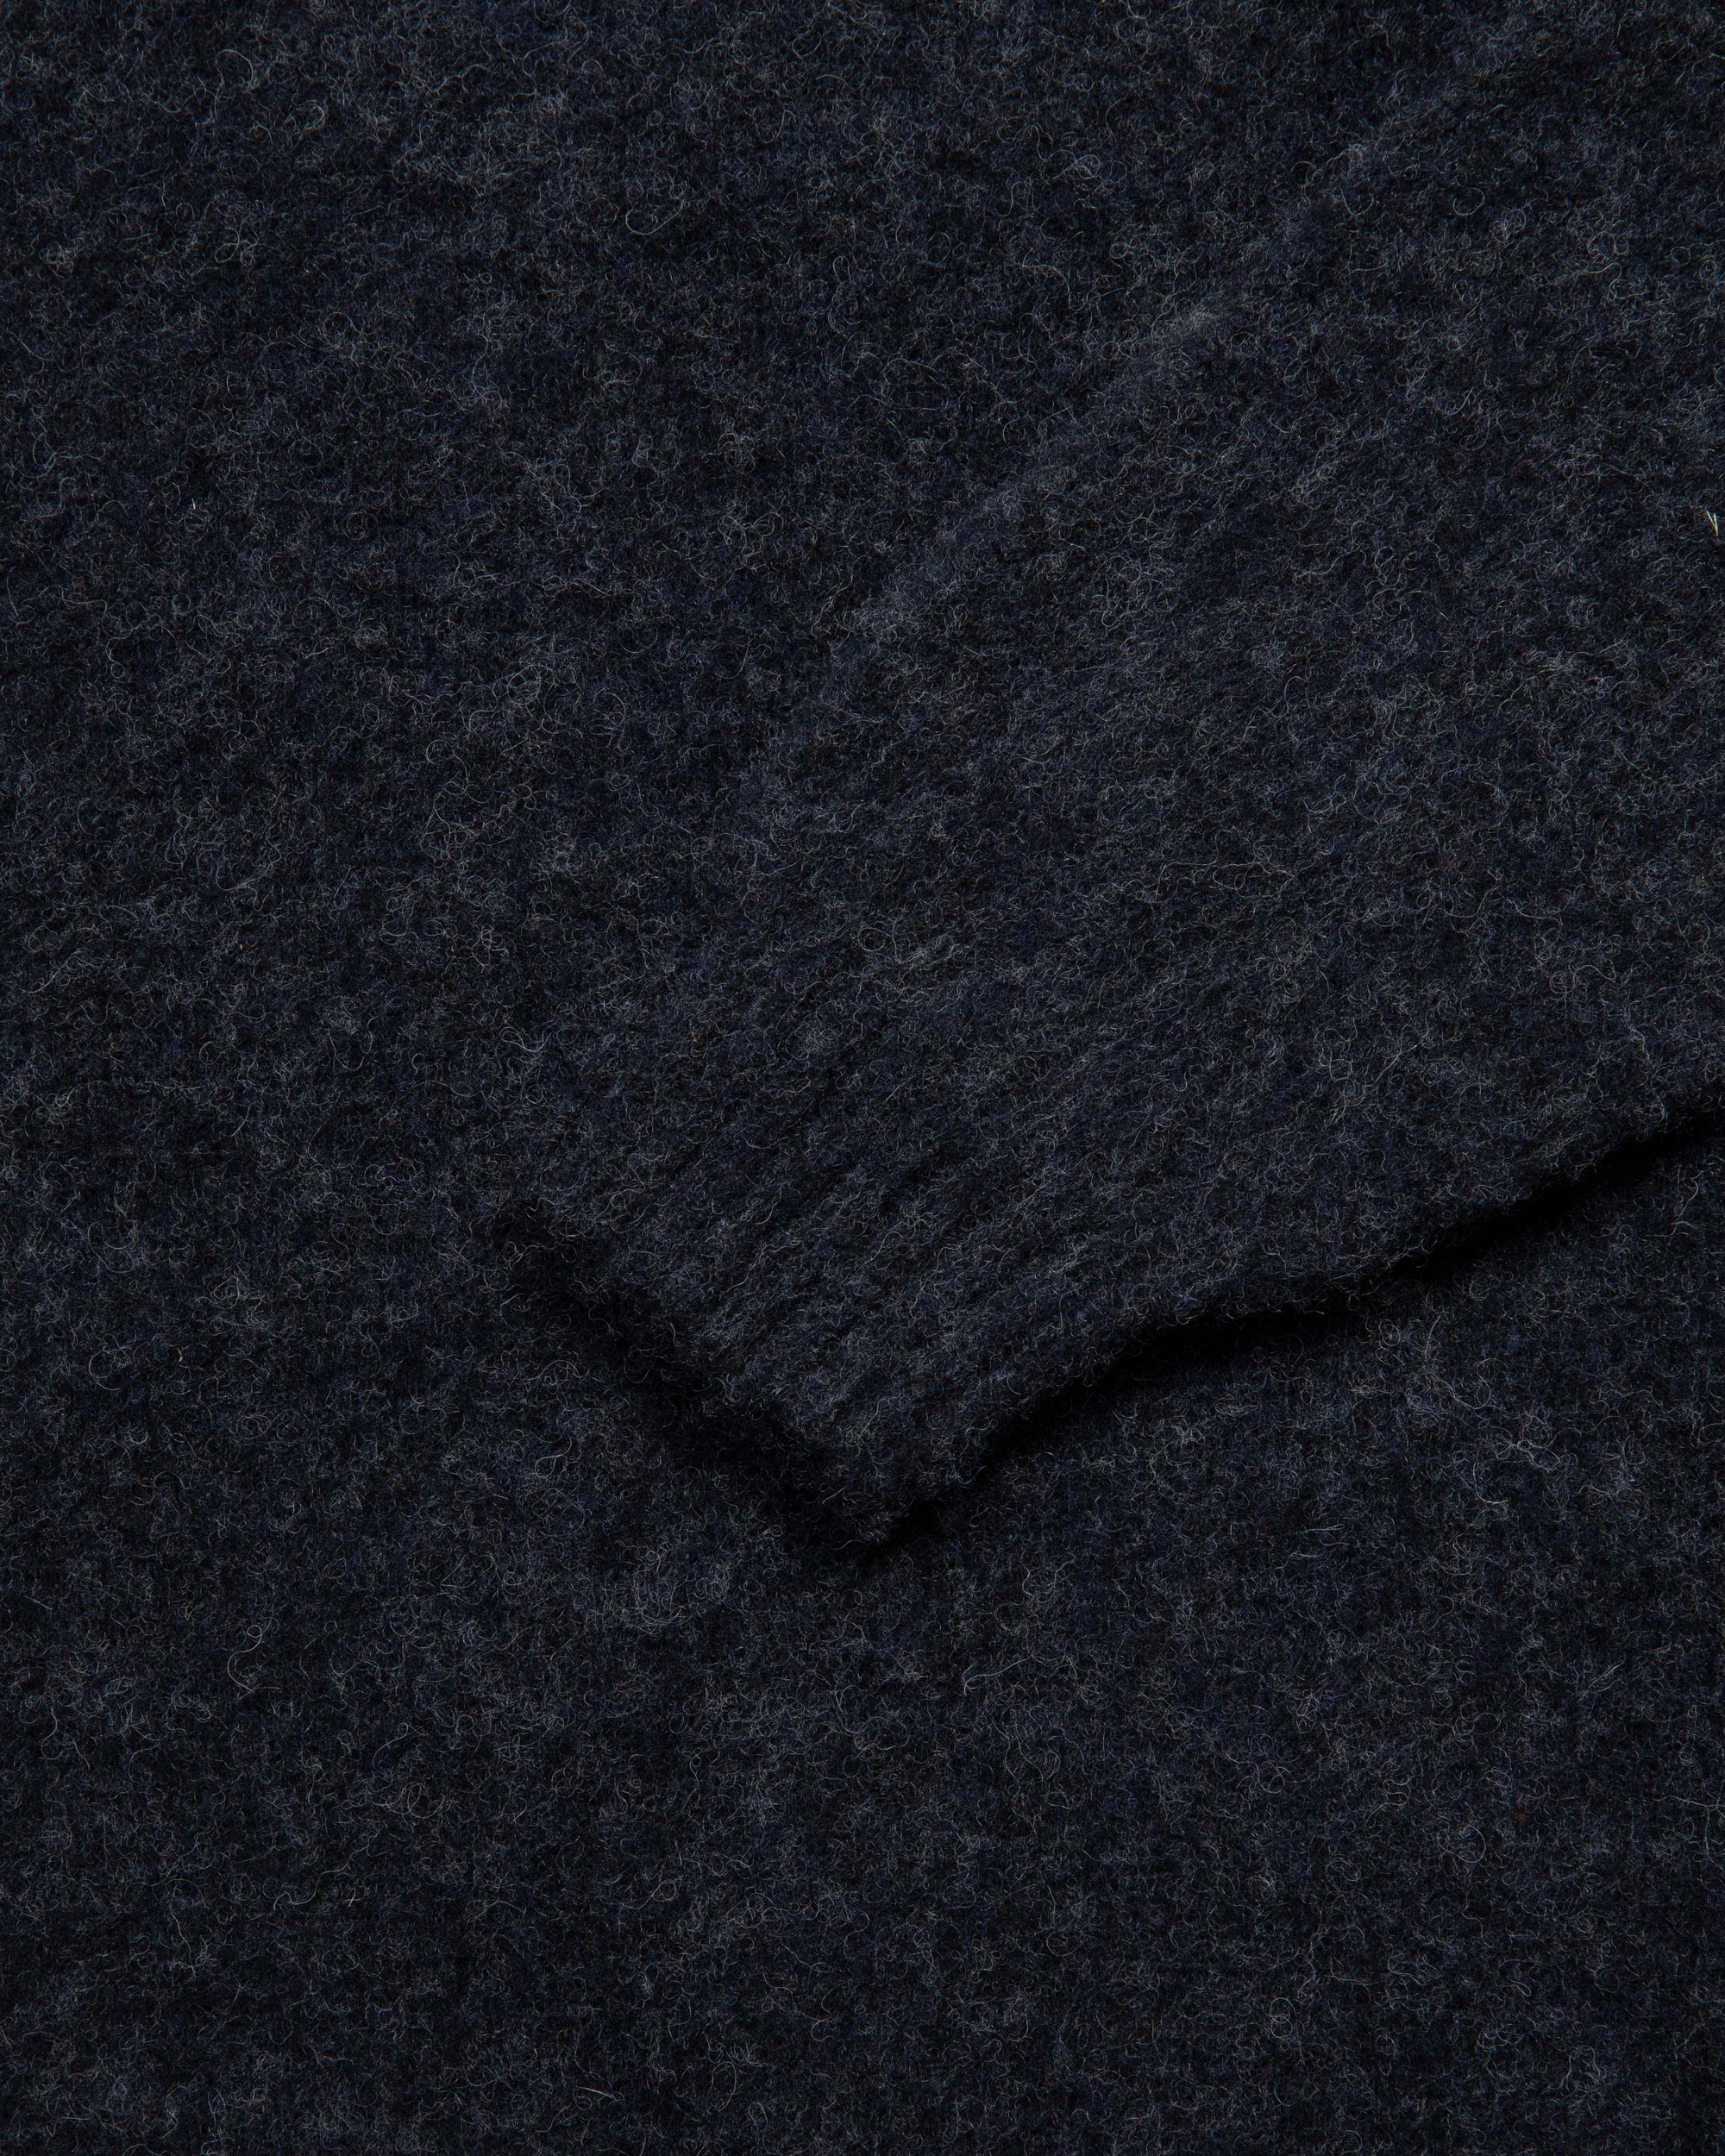 FITZROY SWEATER - DOUBLE BRUSHED CHARCOAL